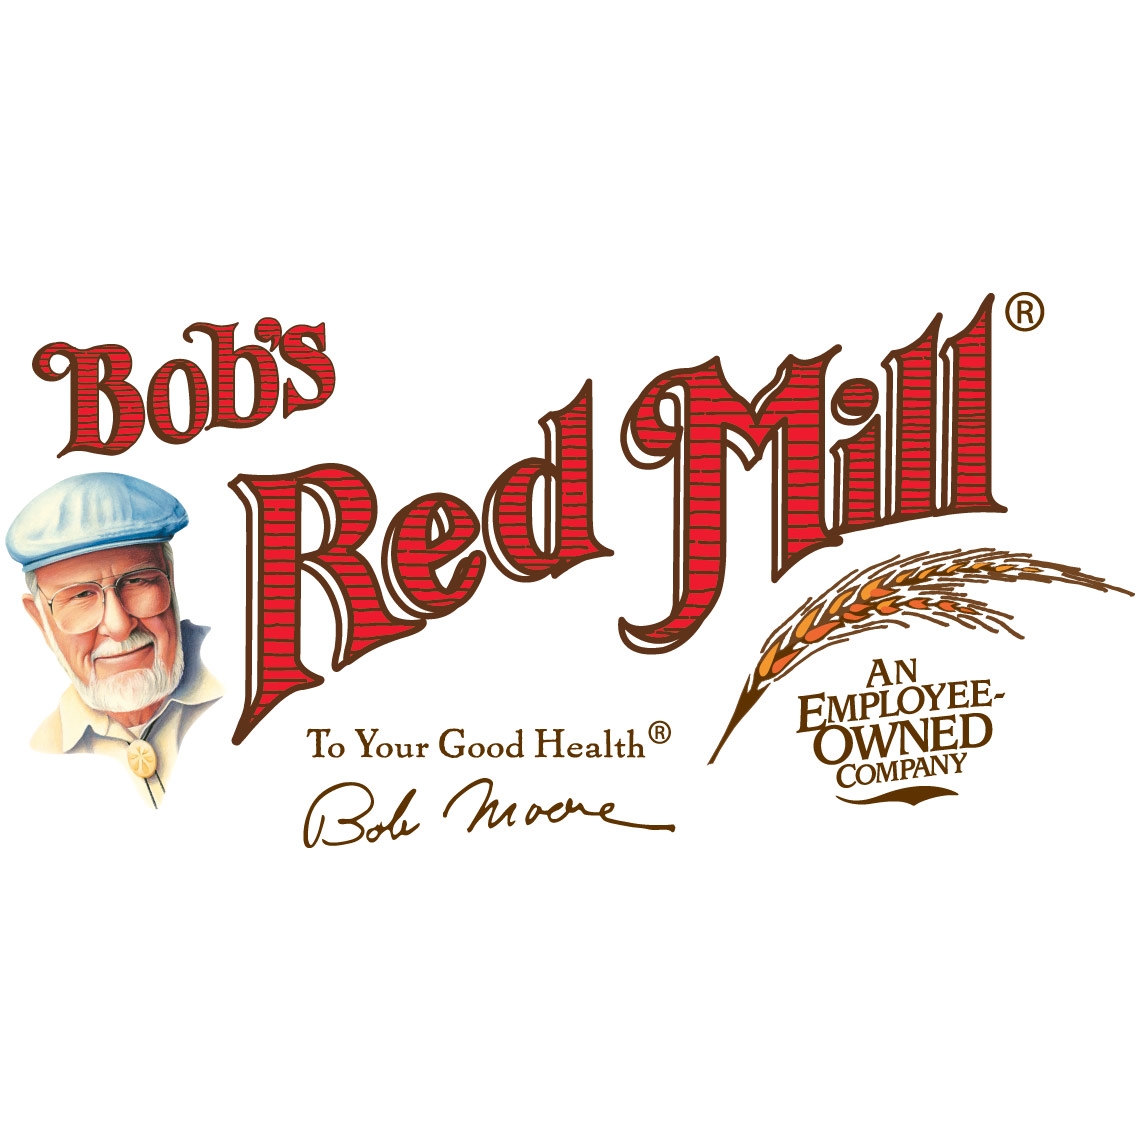 Whole Wheat Flour Bob S Red Mill Natural Foods,Horse Sleeping In Stall